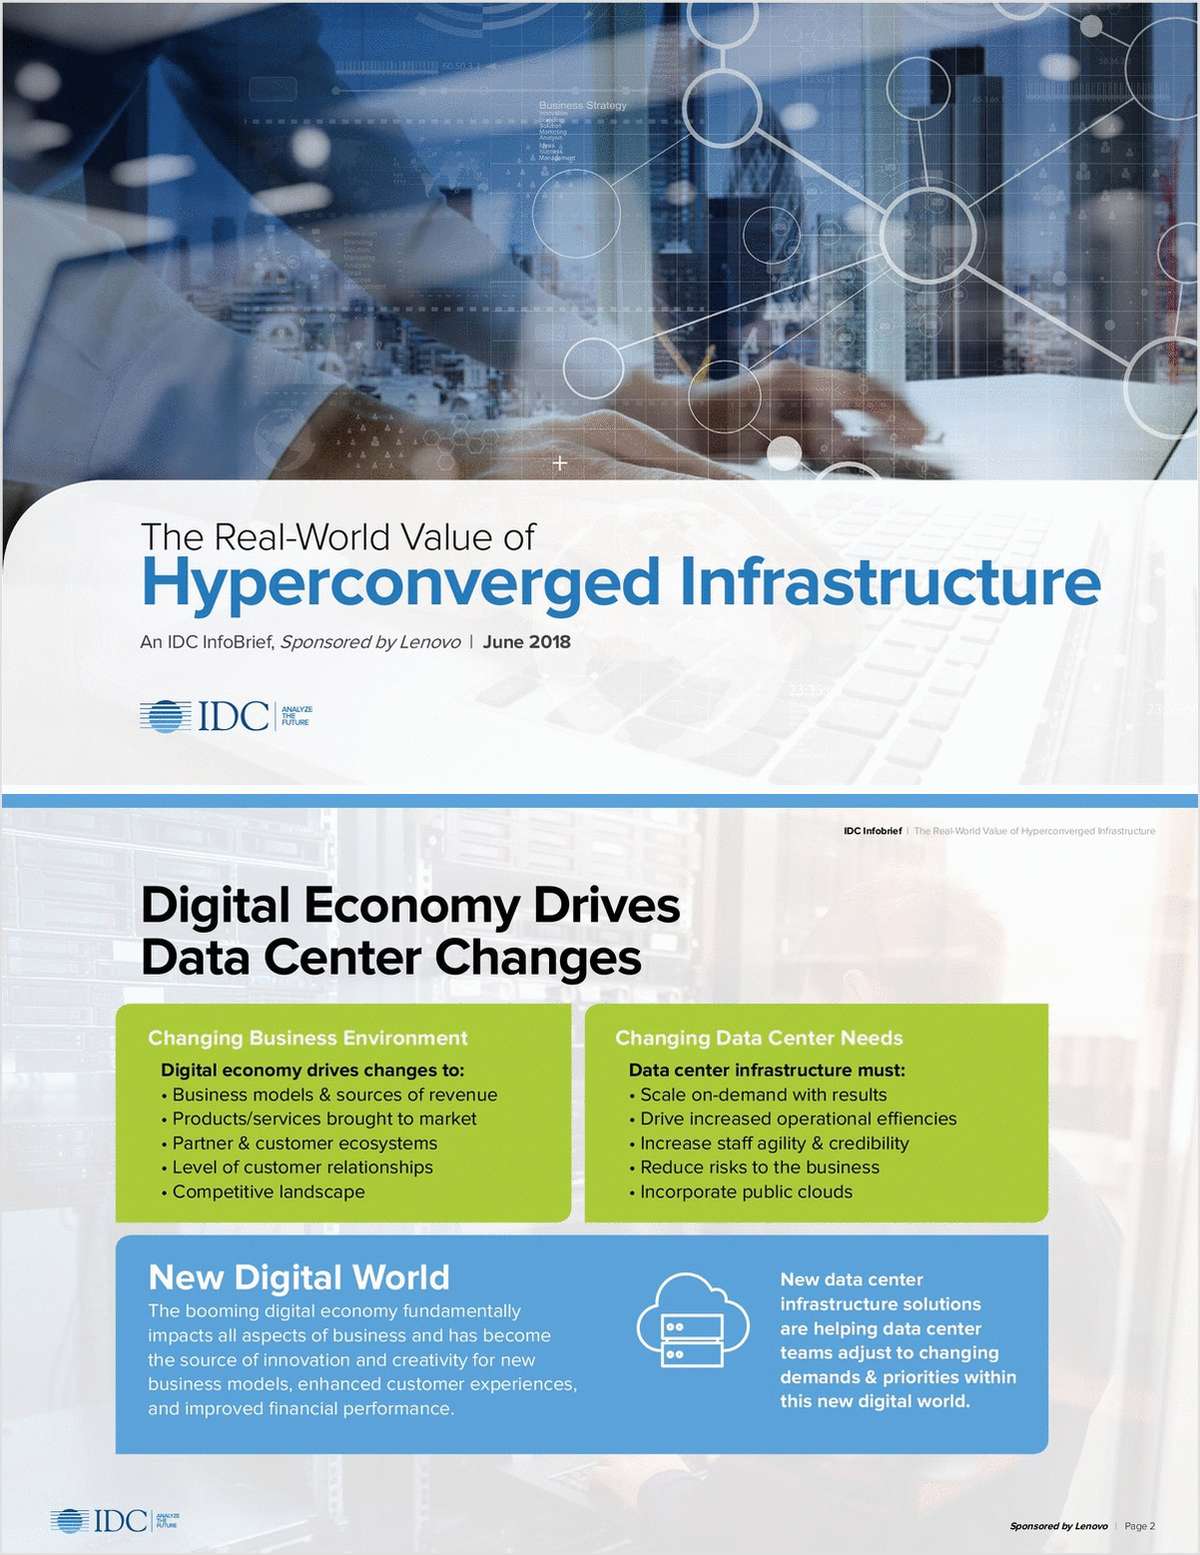 The Real-World Value of Hyperconverged Infrastructure